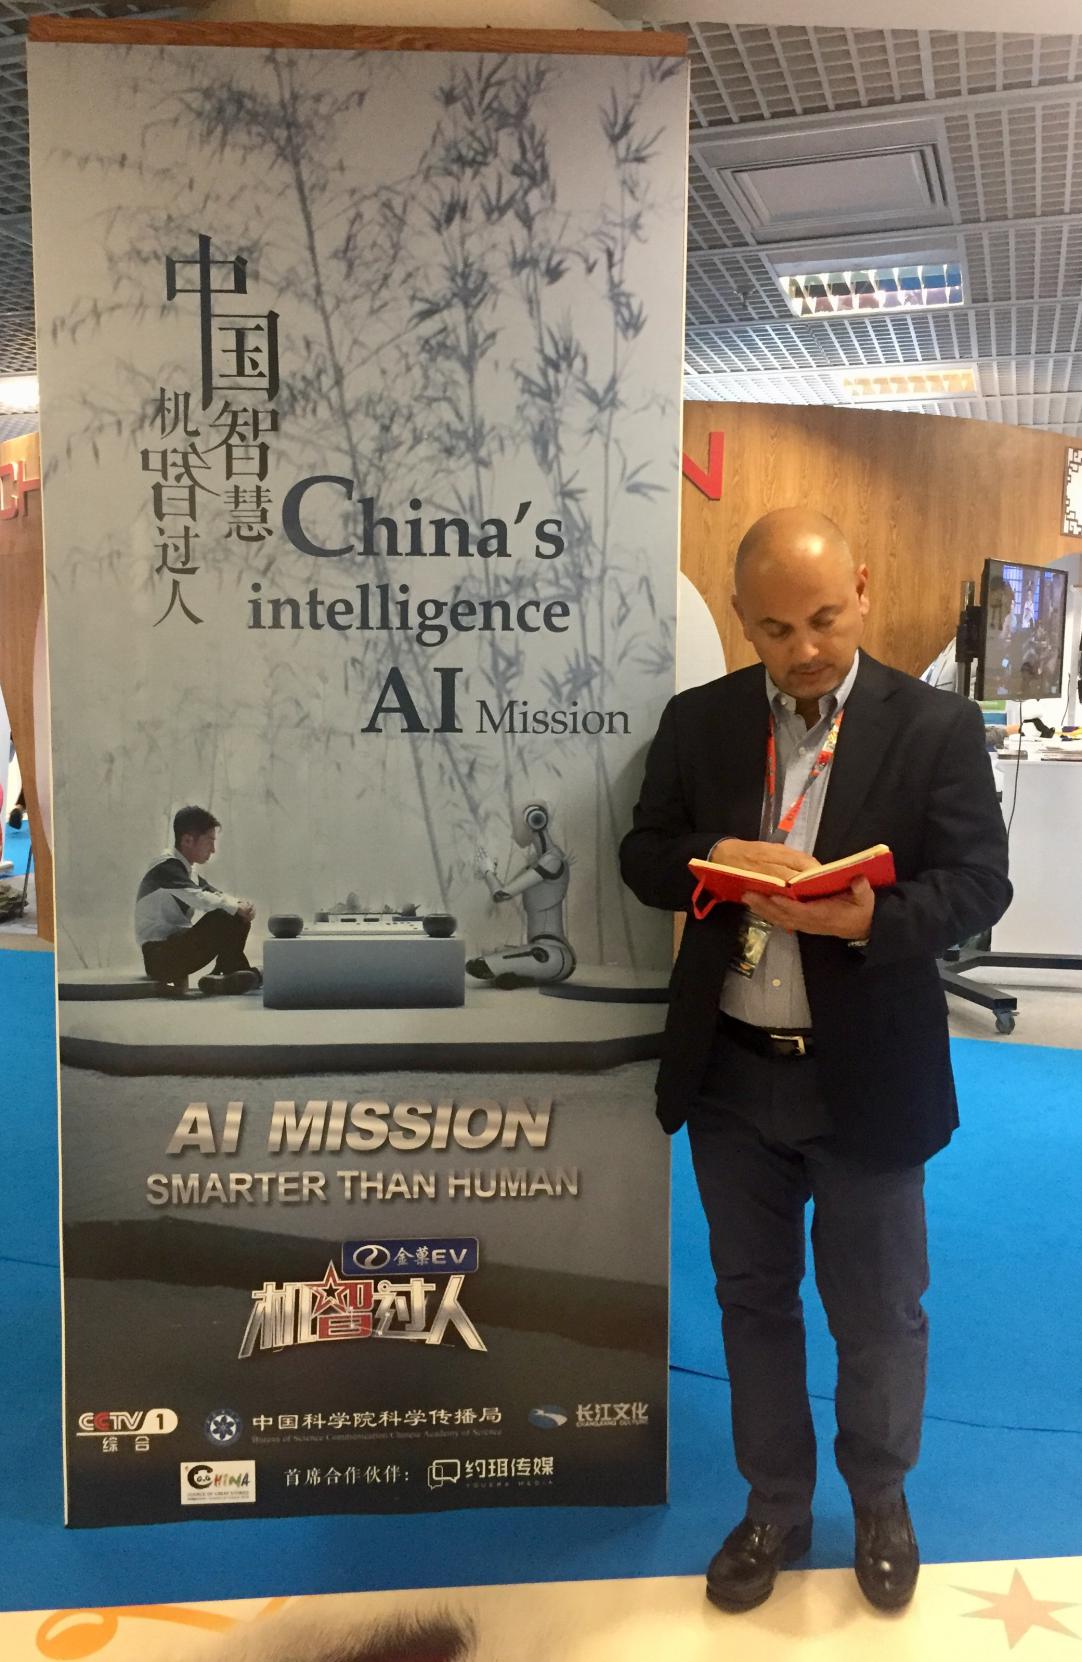 The "AI Mission" concept has been gaining worldwide popularity. [Photo courtesy of CCTV]